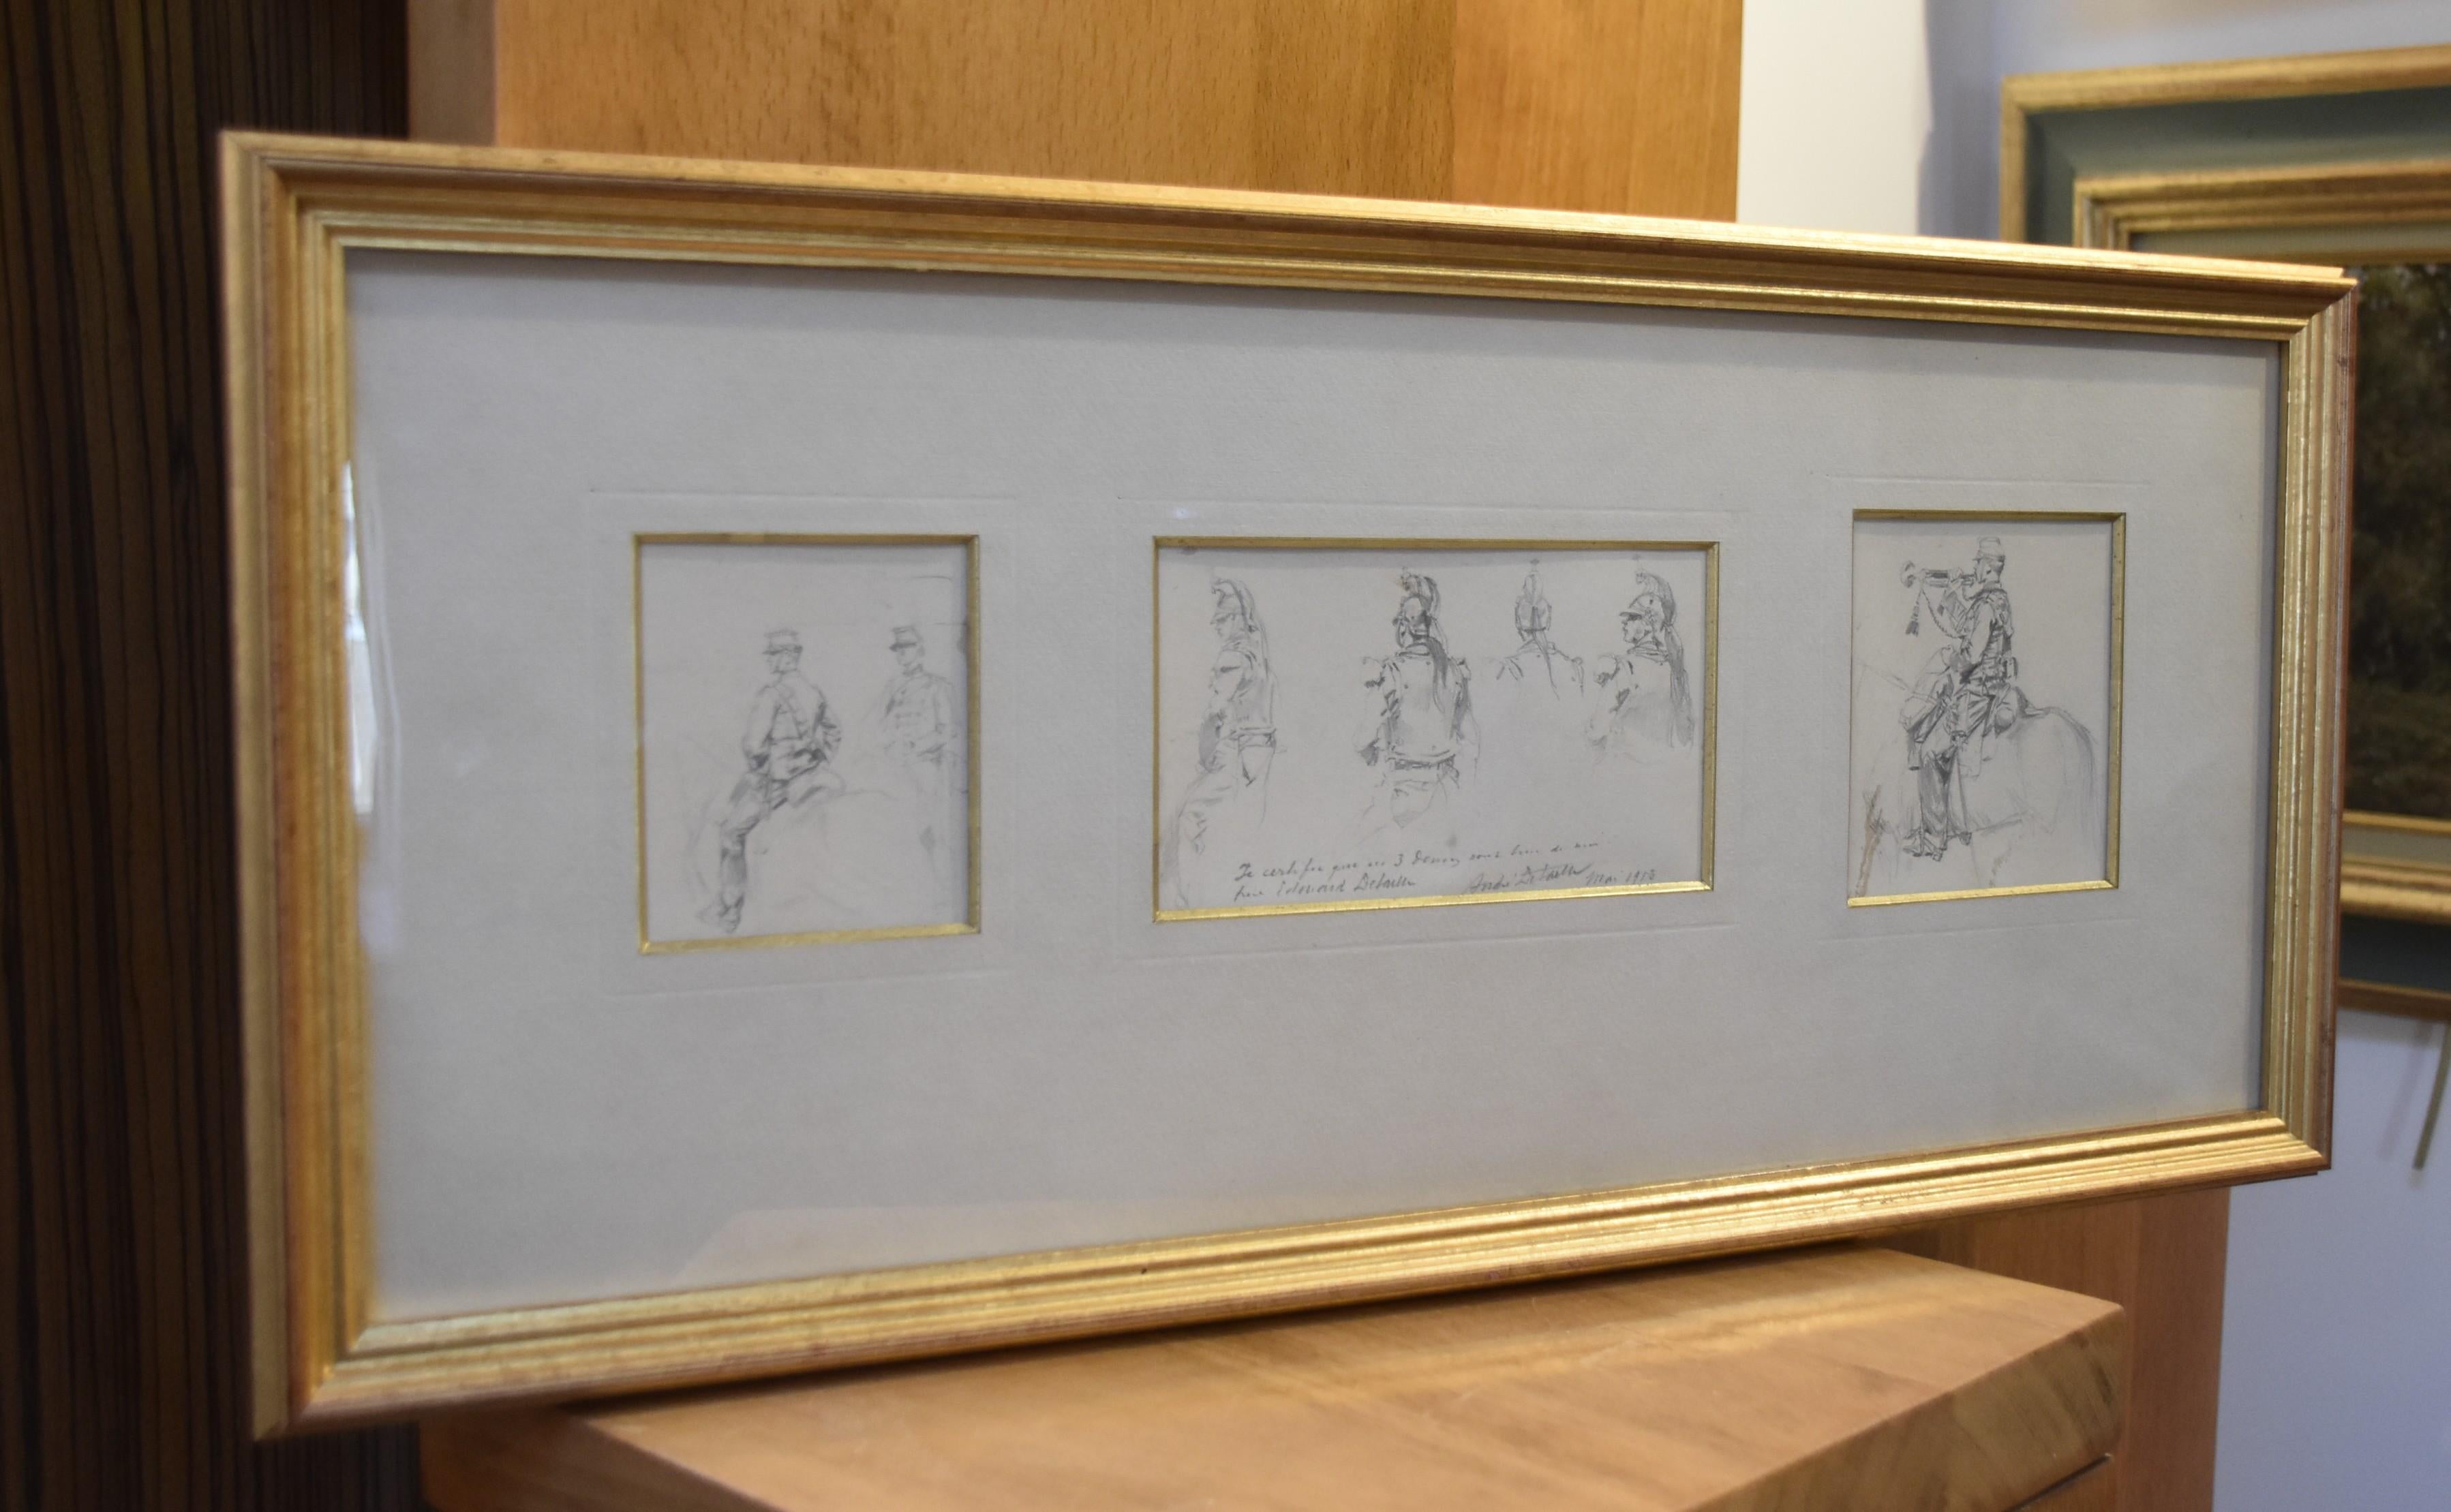 Edouard Detaille (1848 1912), Studies of Horse soldiers, three drawings - Academic Art by Jean Baptiste Édouard Detaille